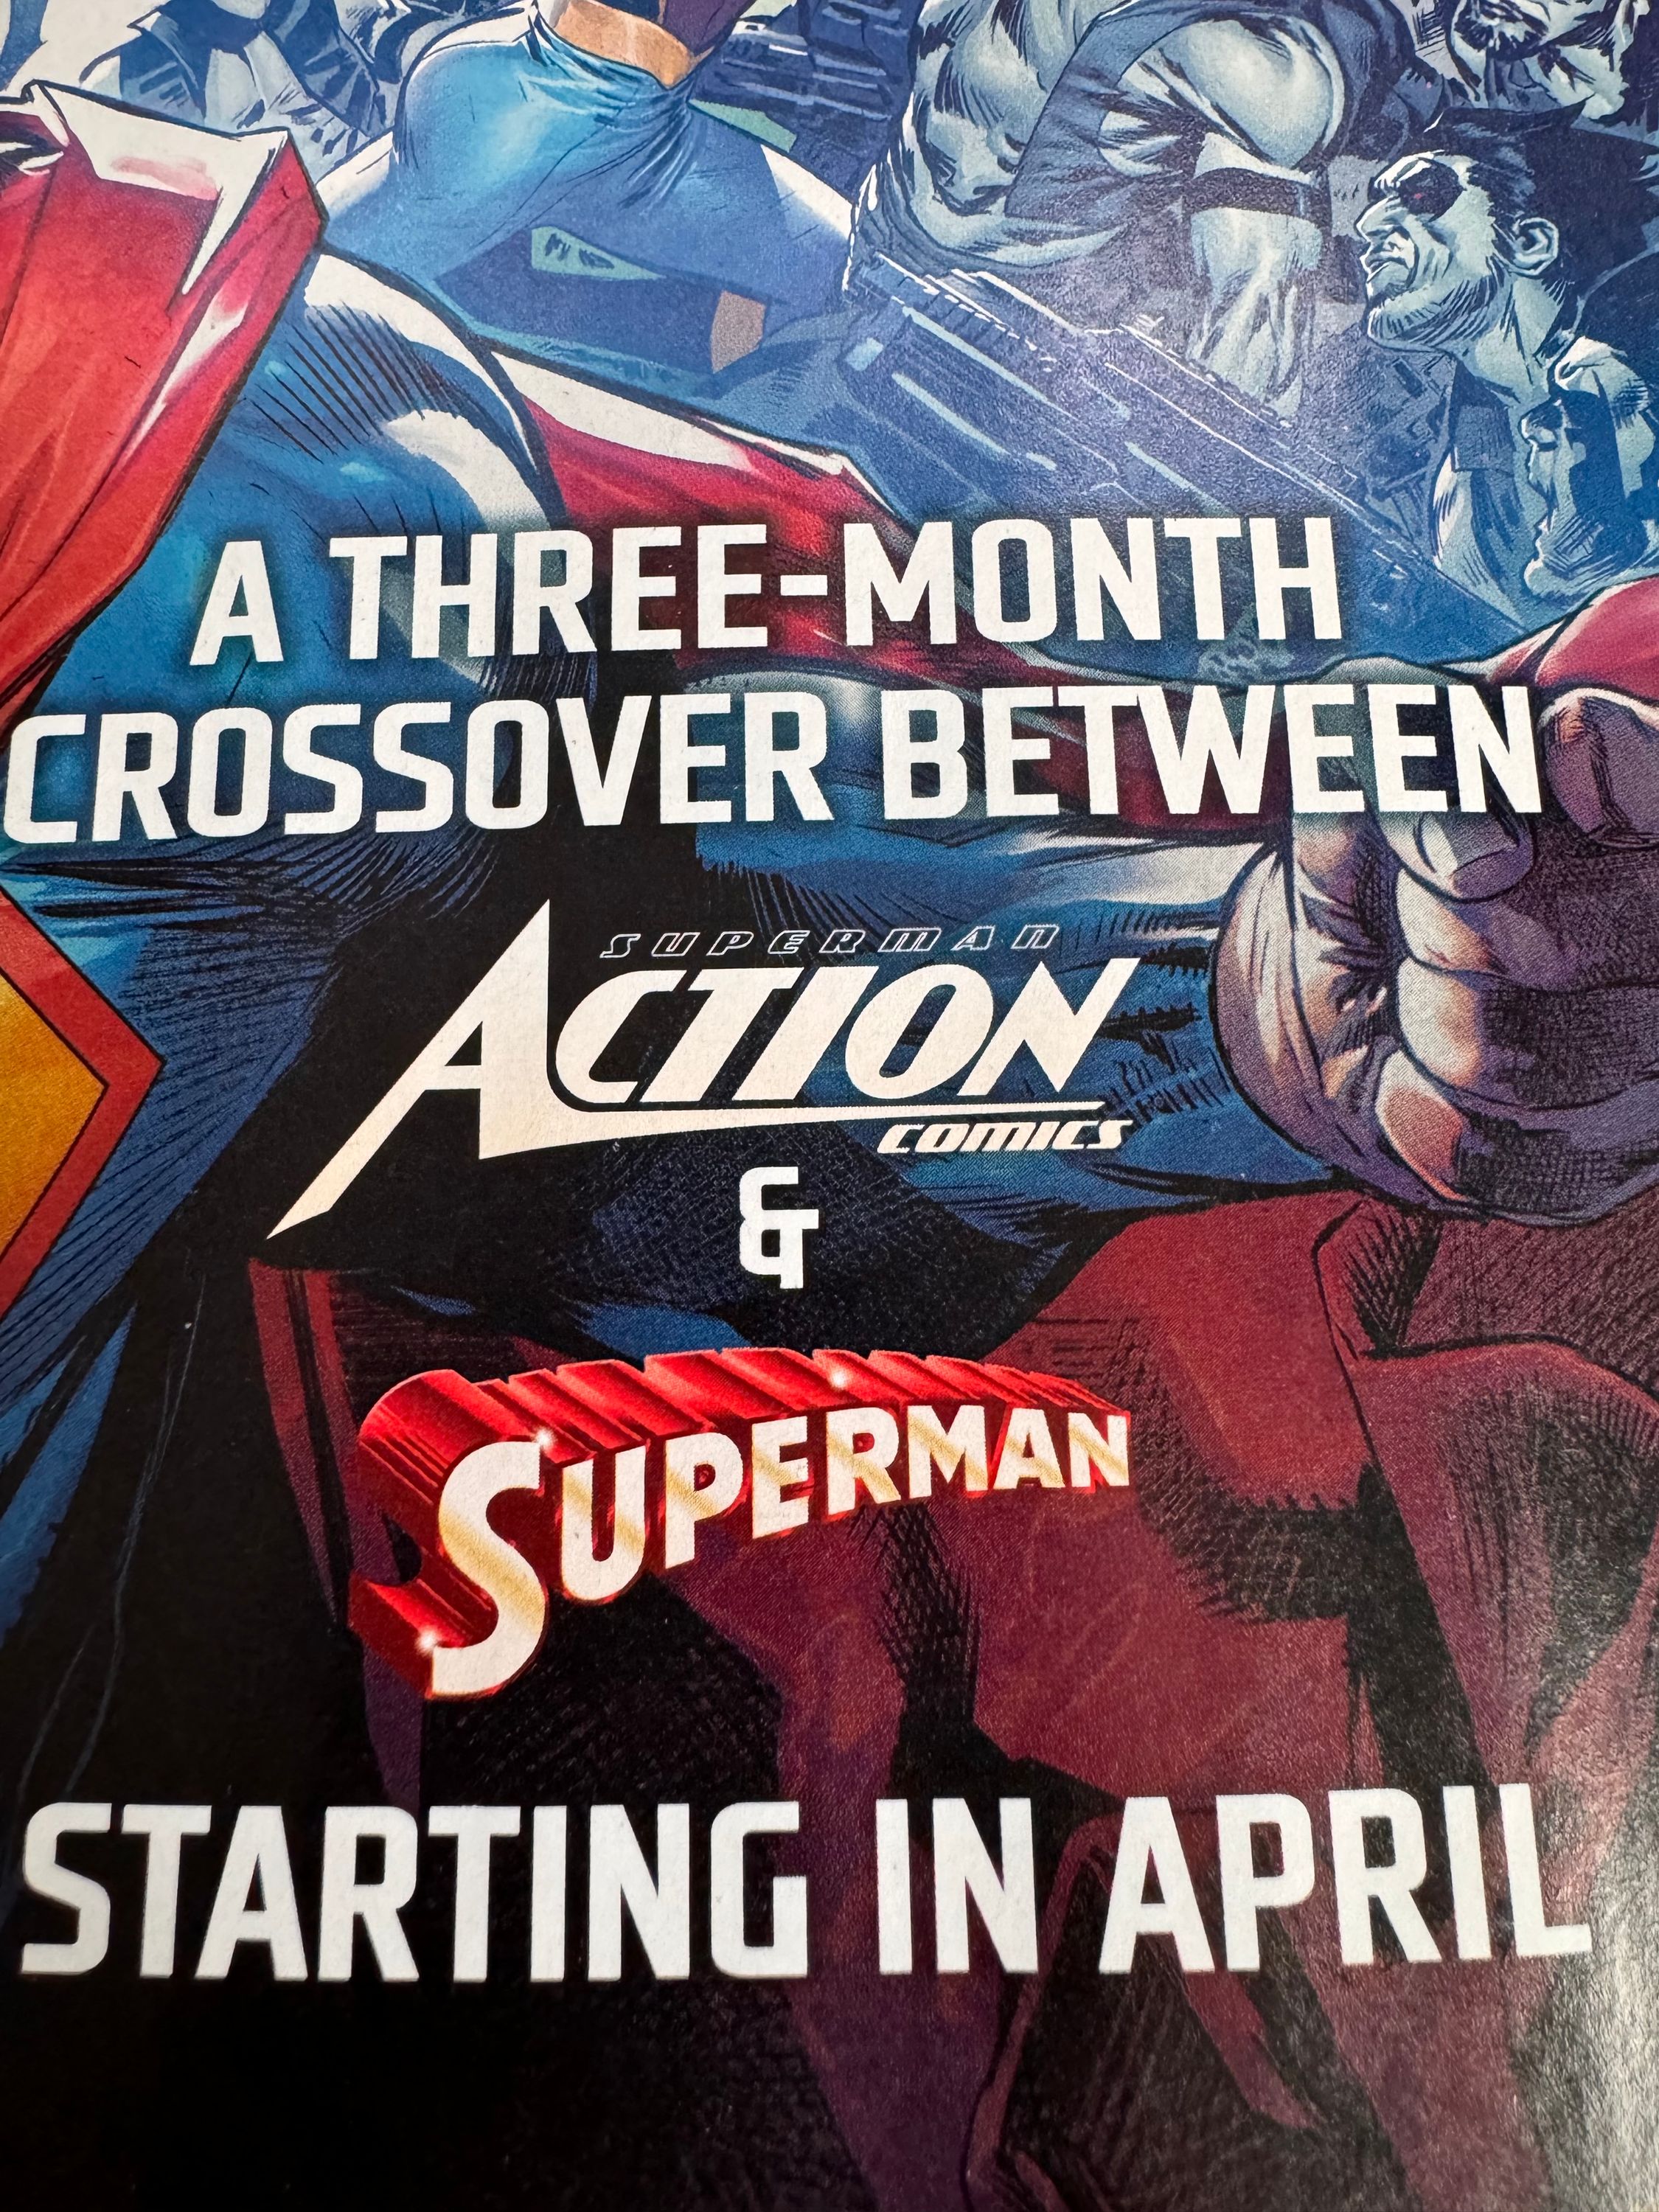 Close up on the text A THREE-MONTH CROSSOVER BETWEEN ACTION COMICS & SUPERMAN STARTING IN APRIL